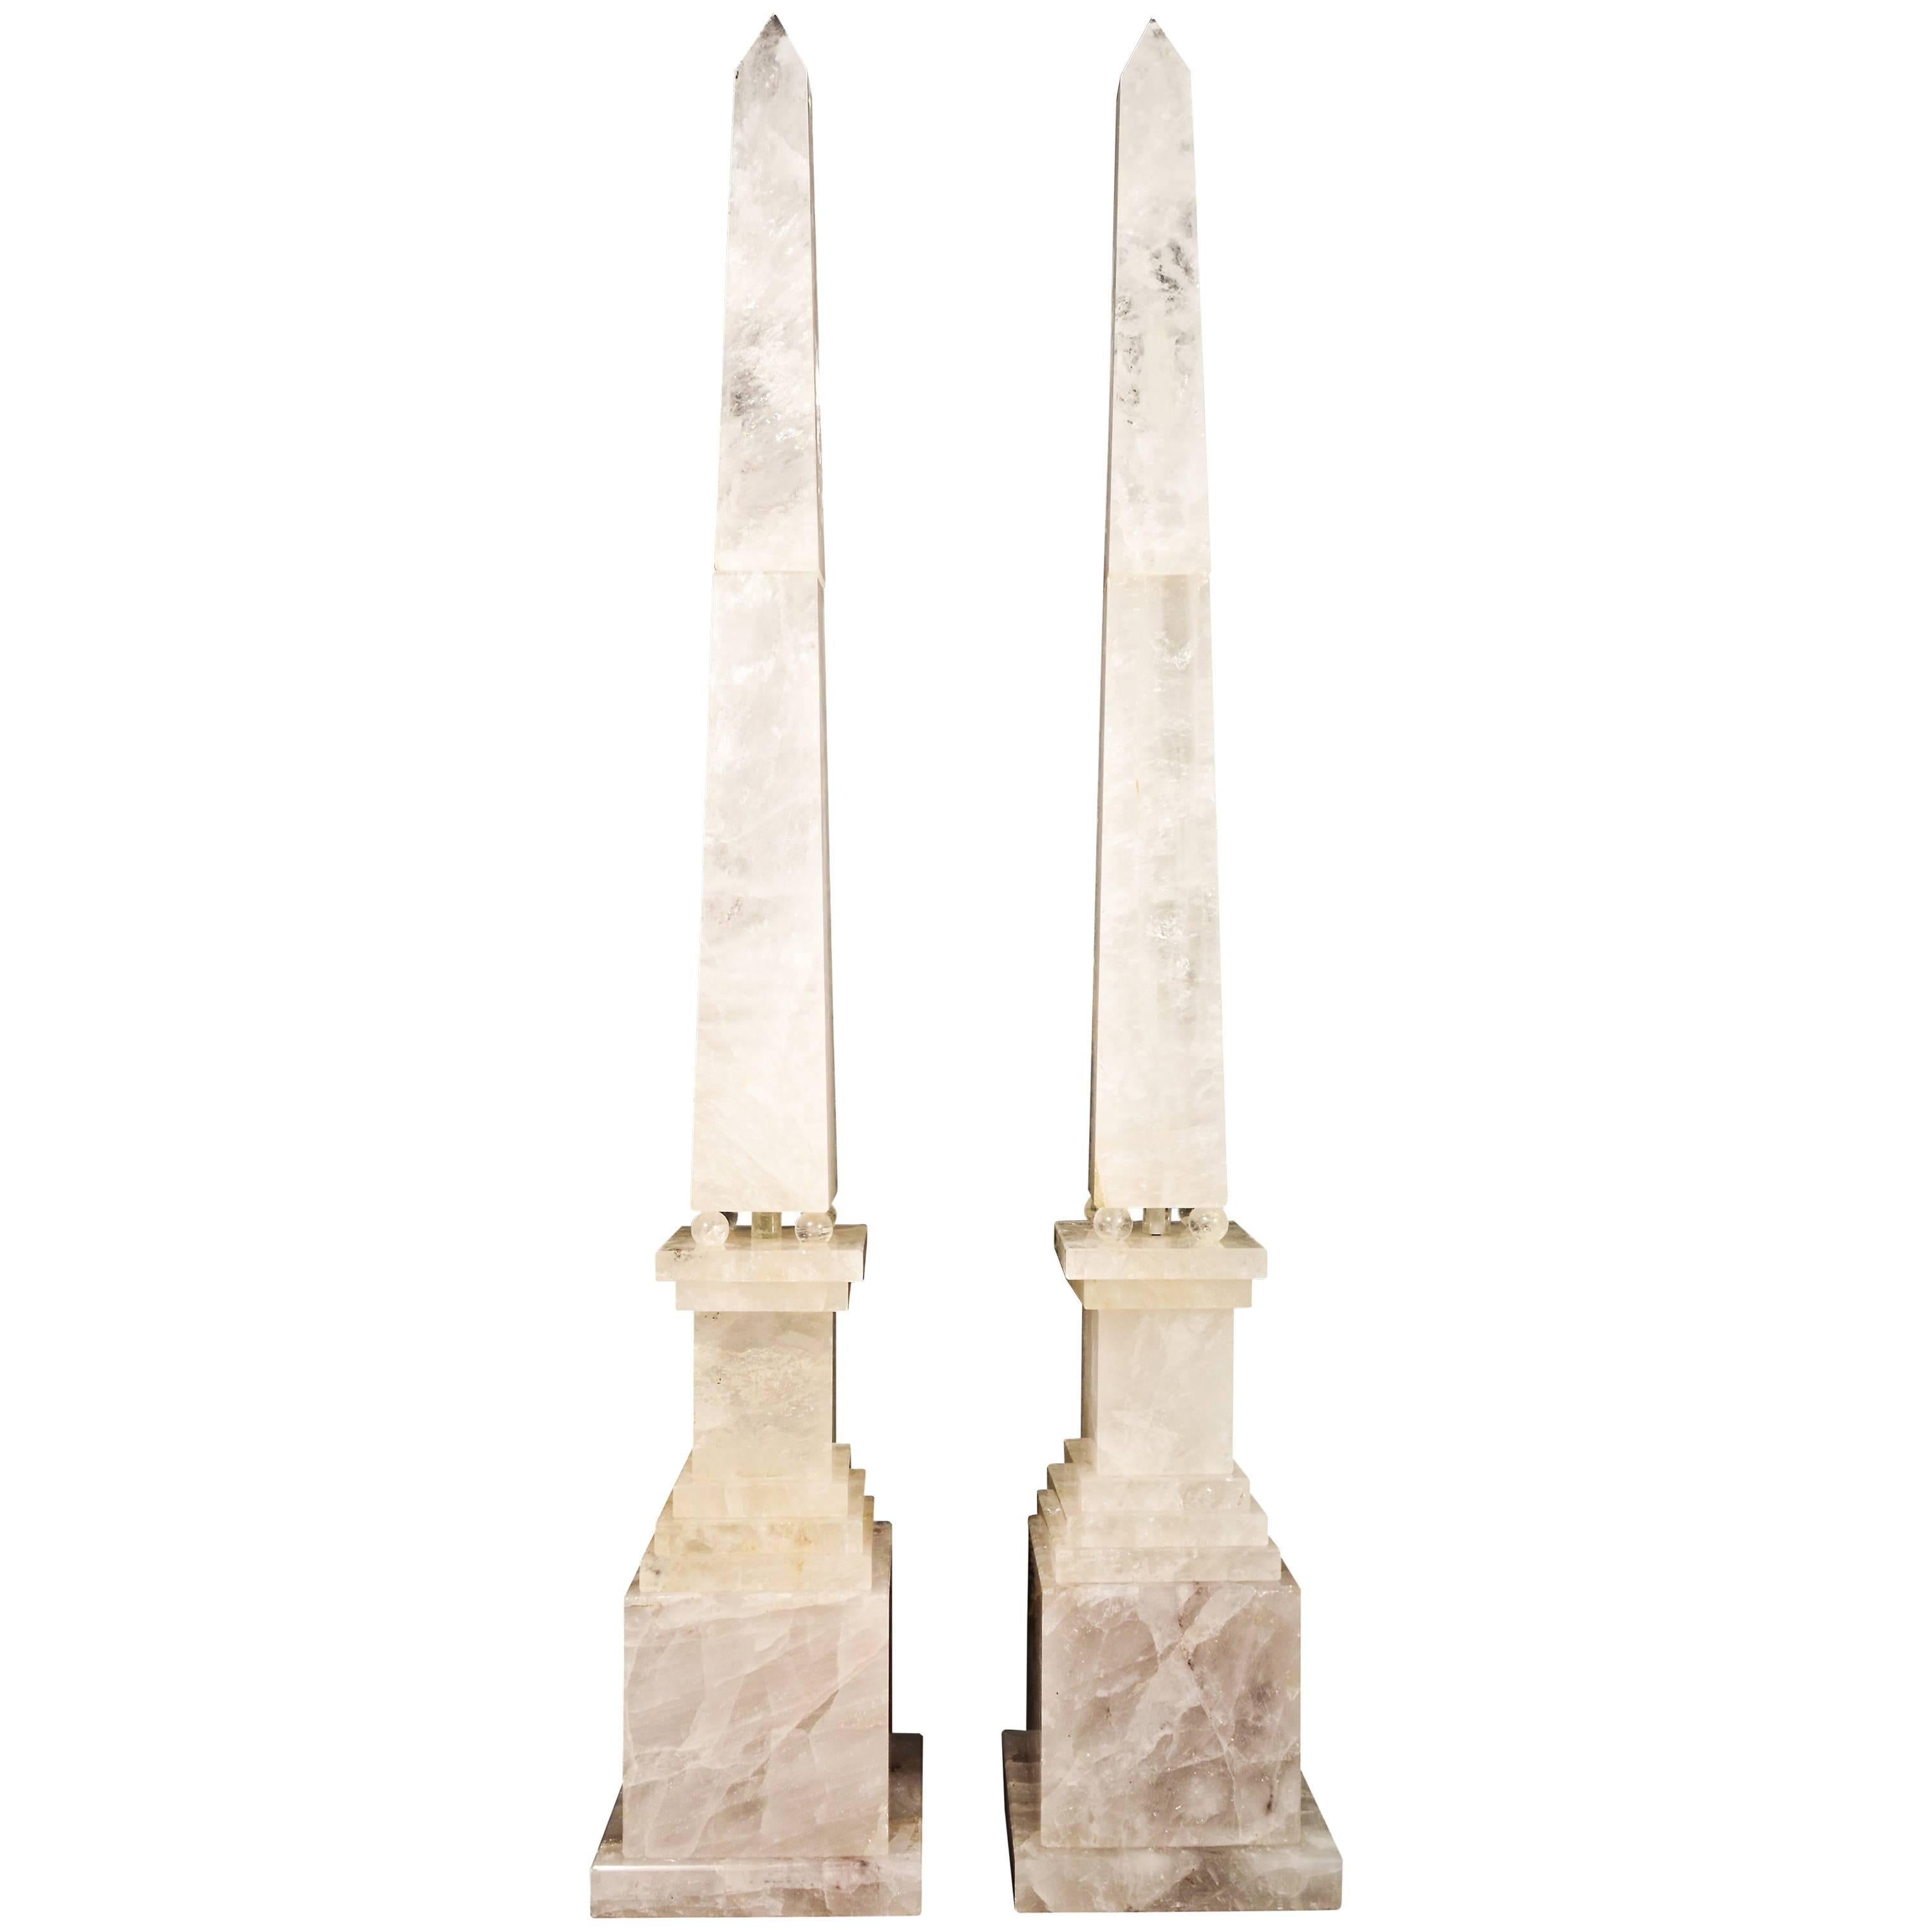 Pair of Monumental and Large Art Deco Style Cut Rock Crystal Obelisks